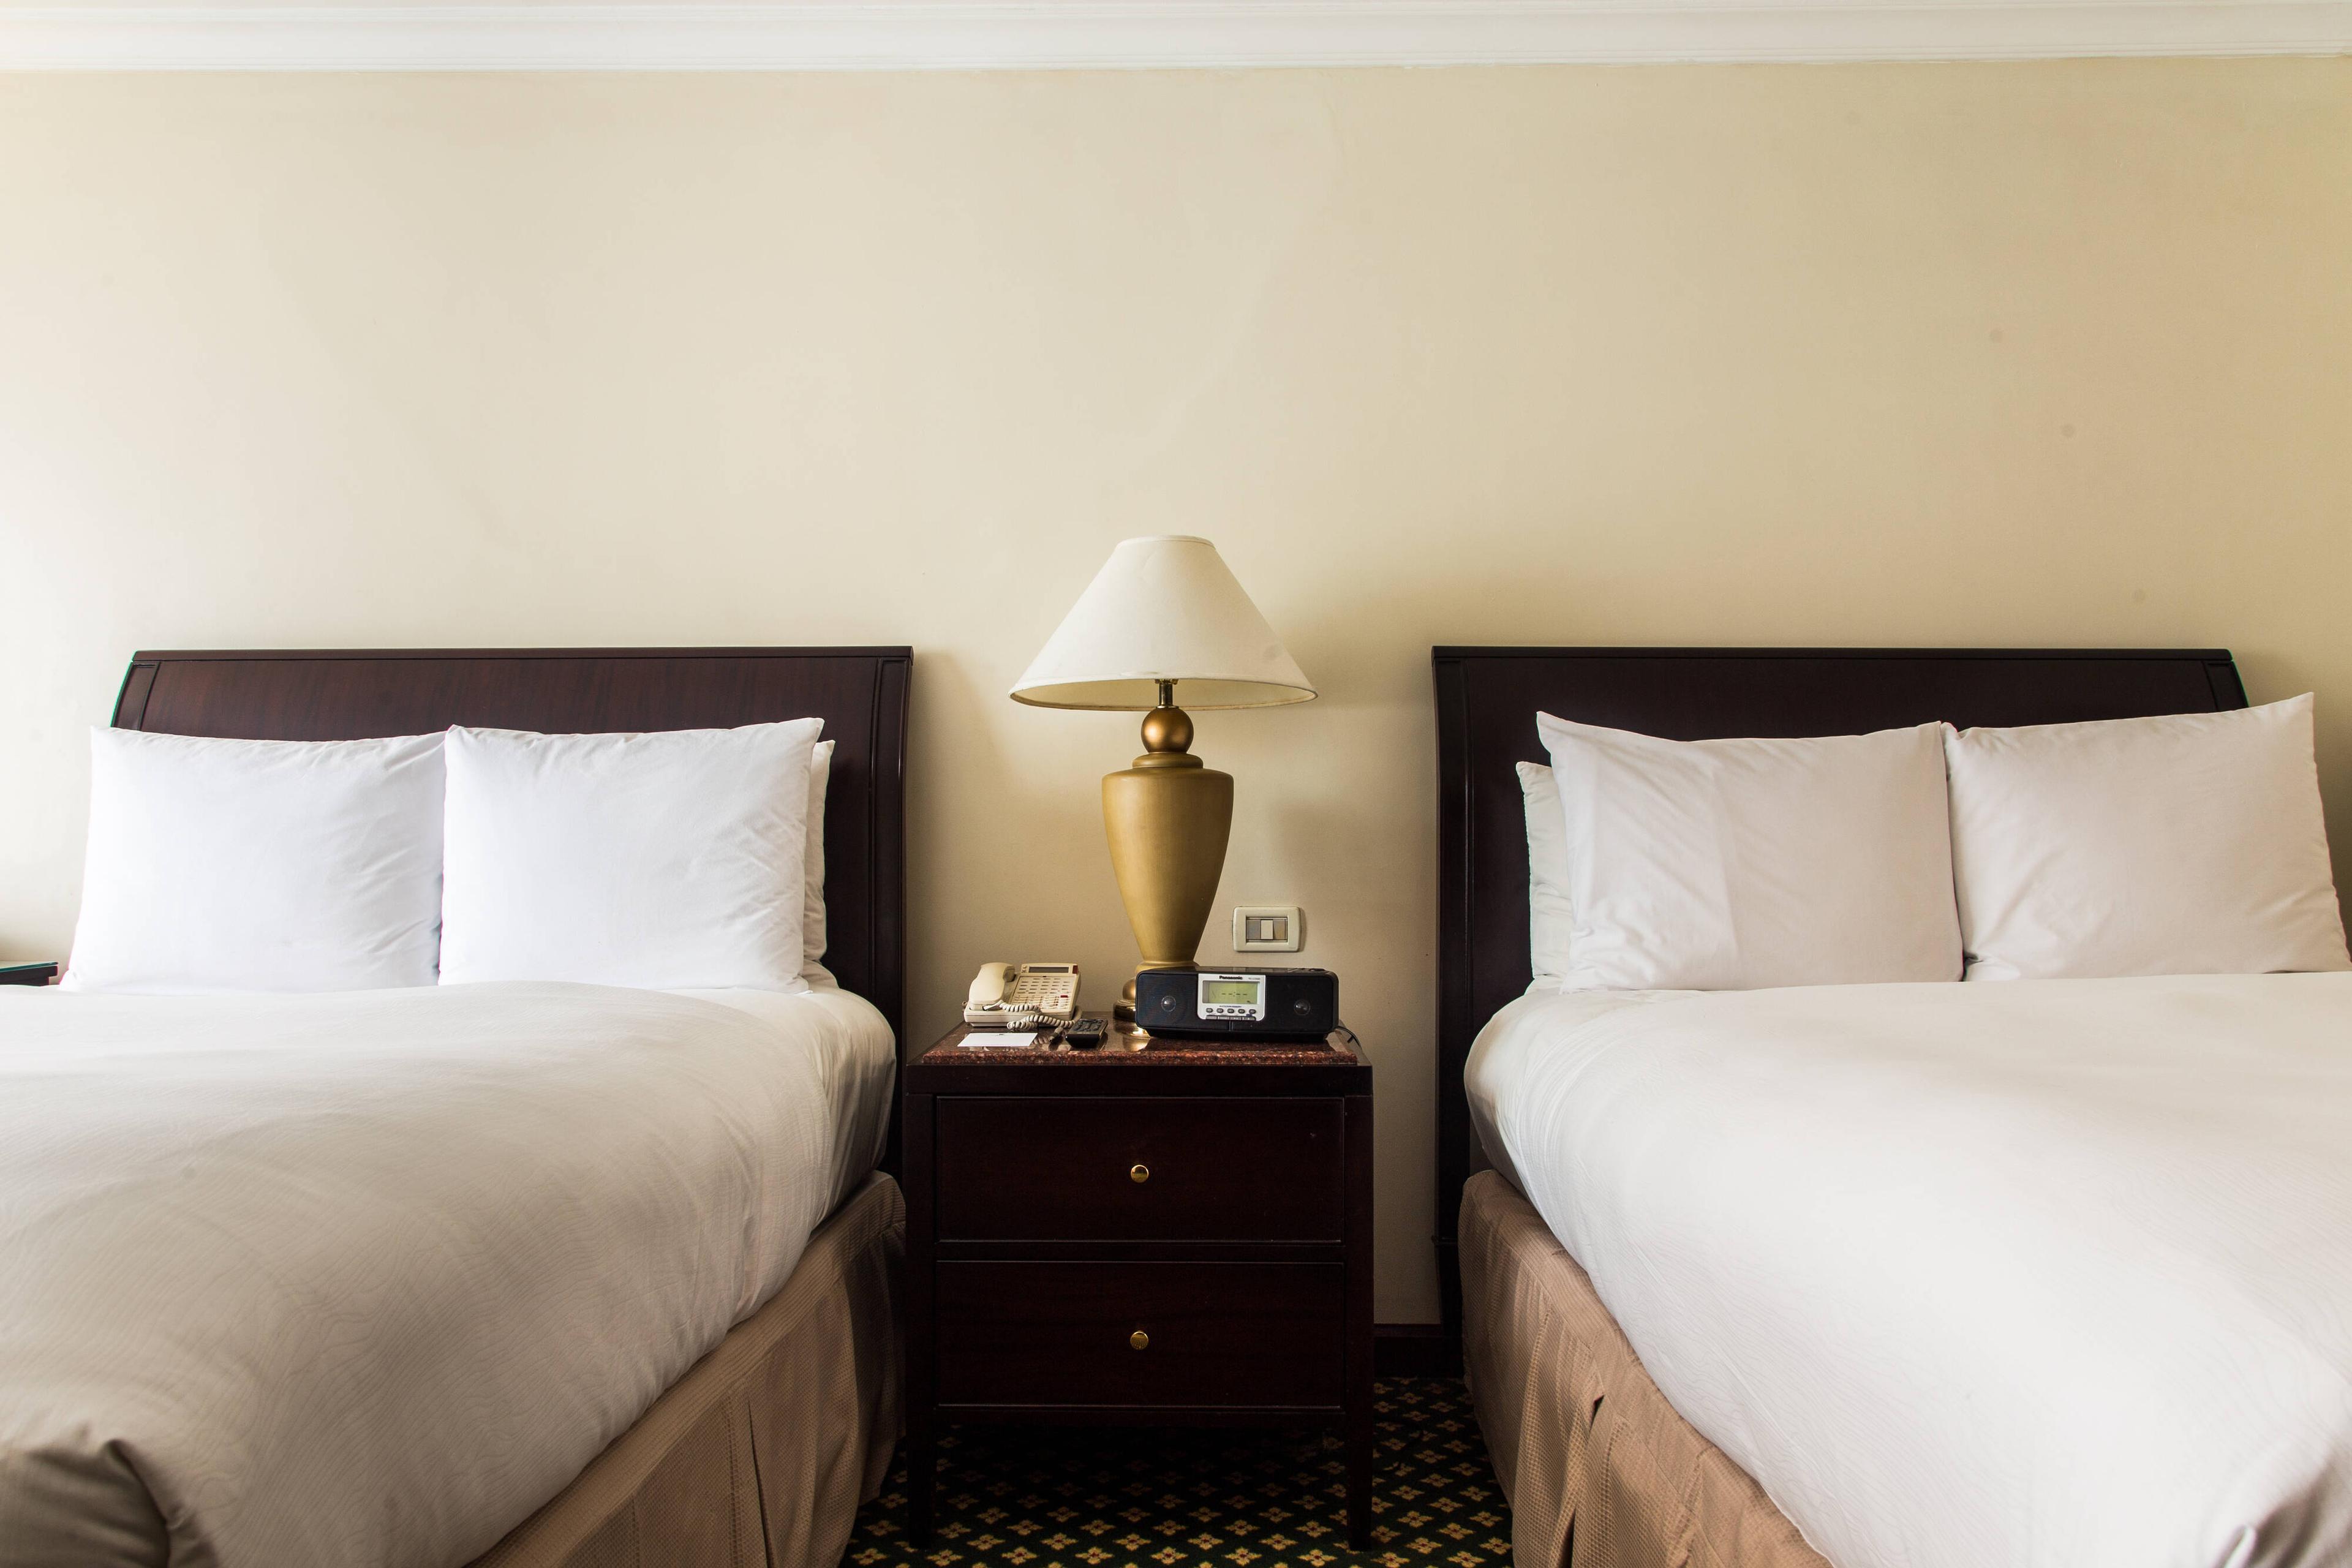 Our Deluxe Double Room feature elegant dark wood furnishings in a comfortable setting with dedicated work desks, television and luxury bedding with ambient natural daylight.